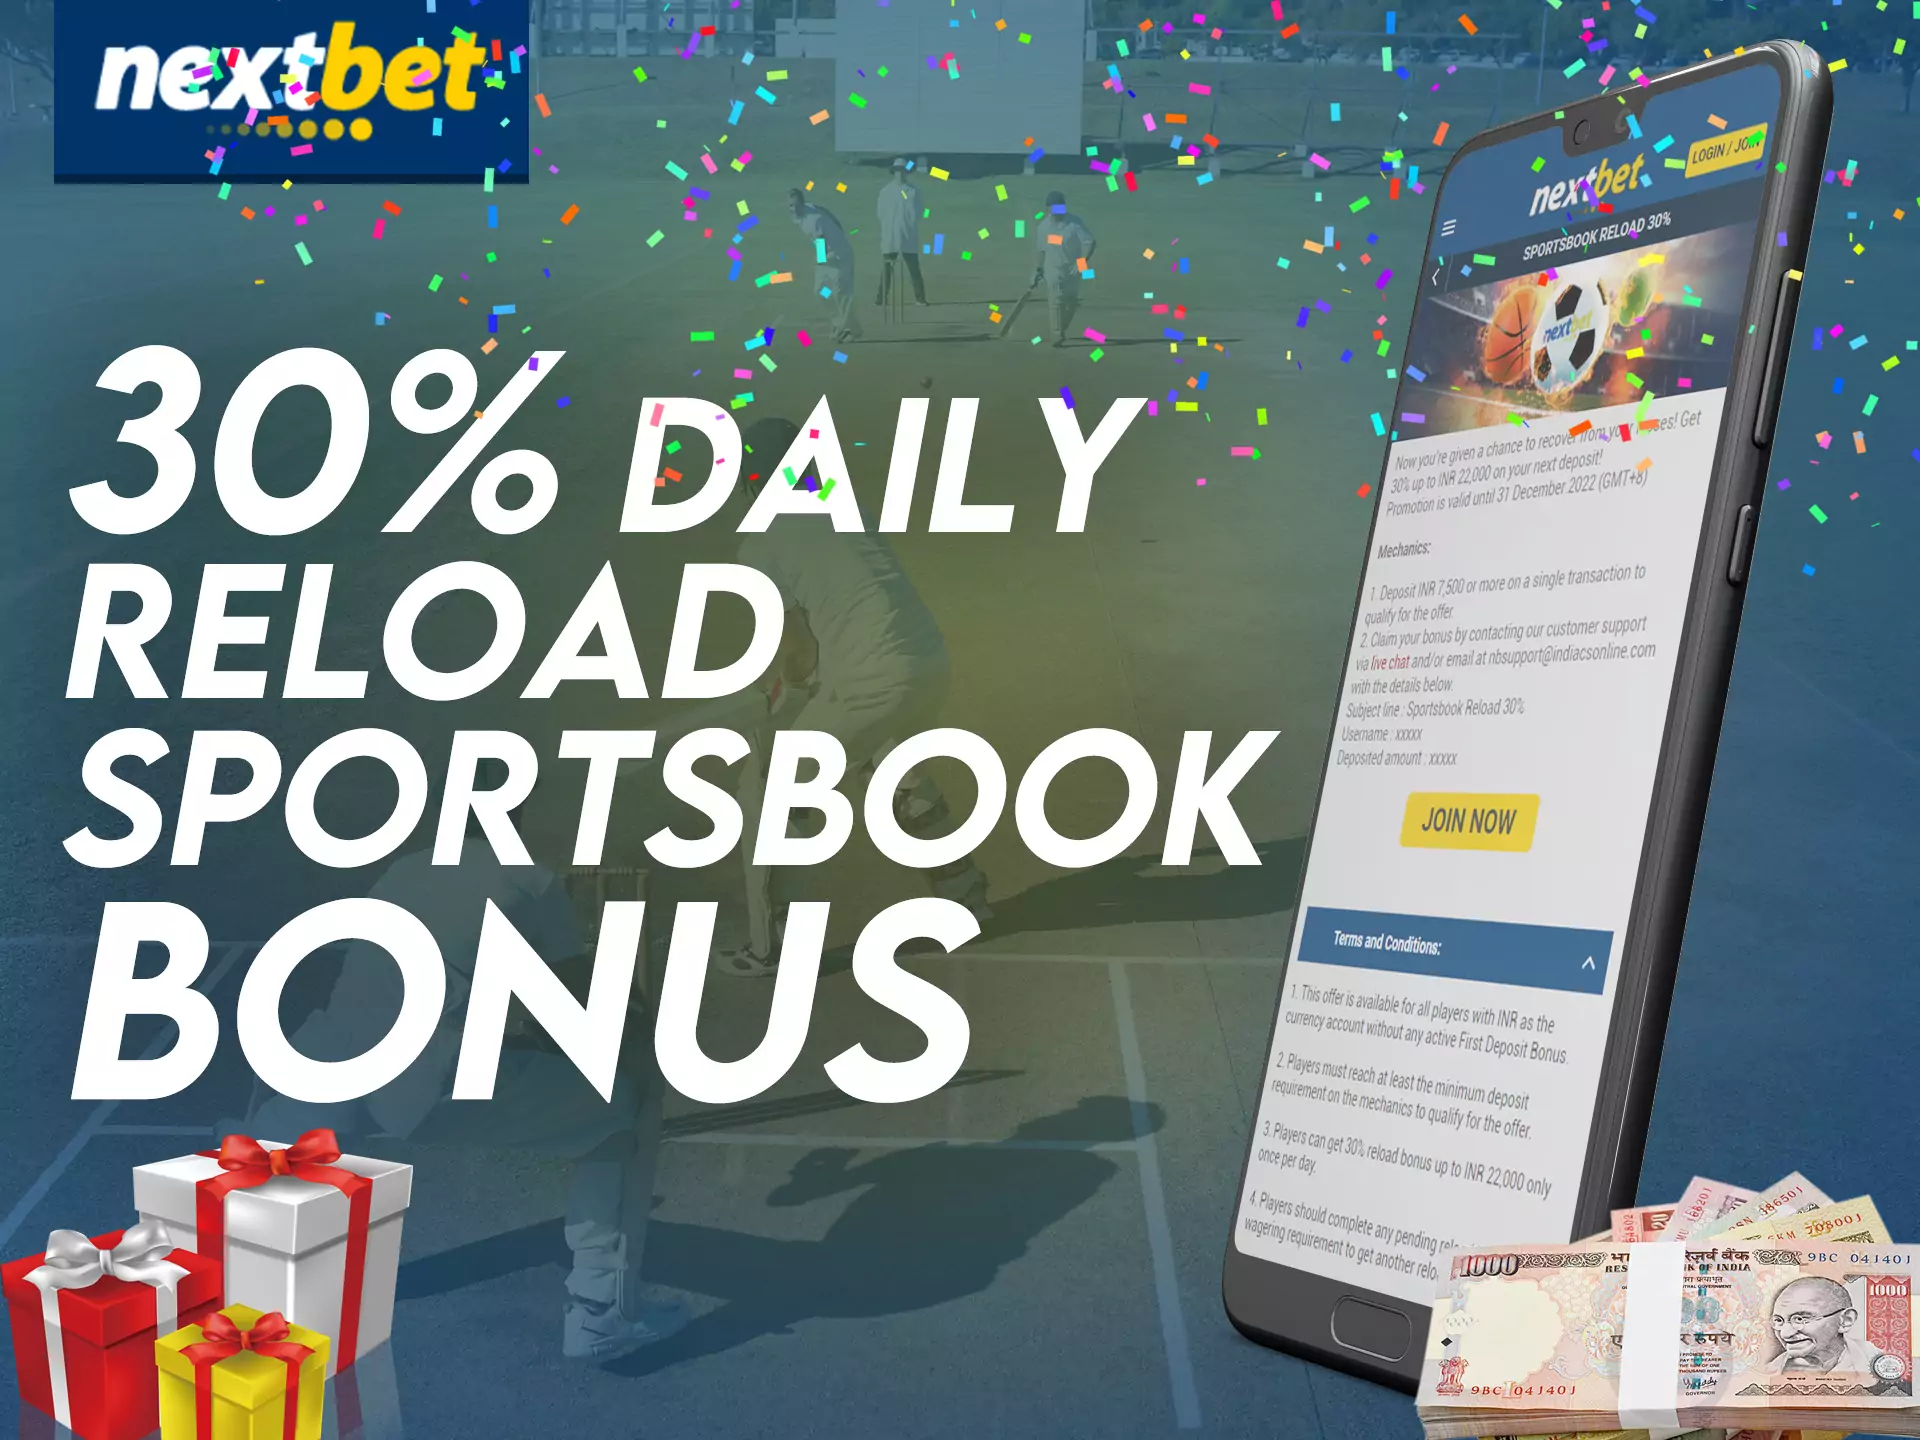 In the Nextbet app, get a special bonus for a sportsbook.